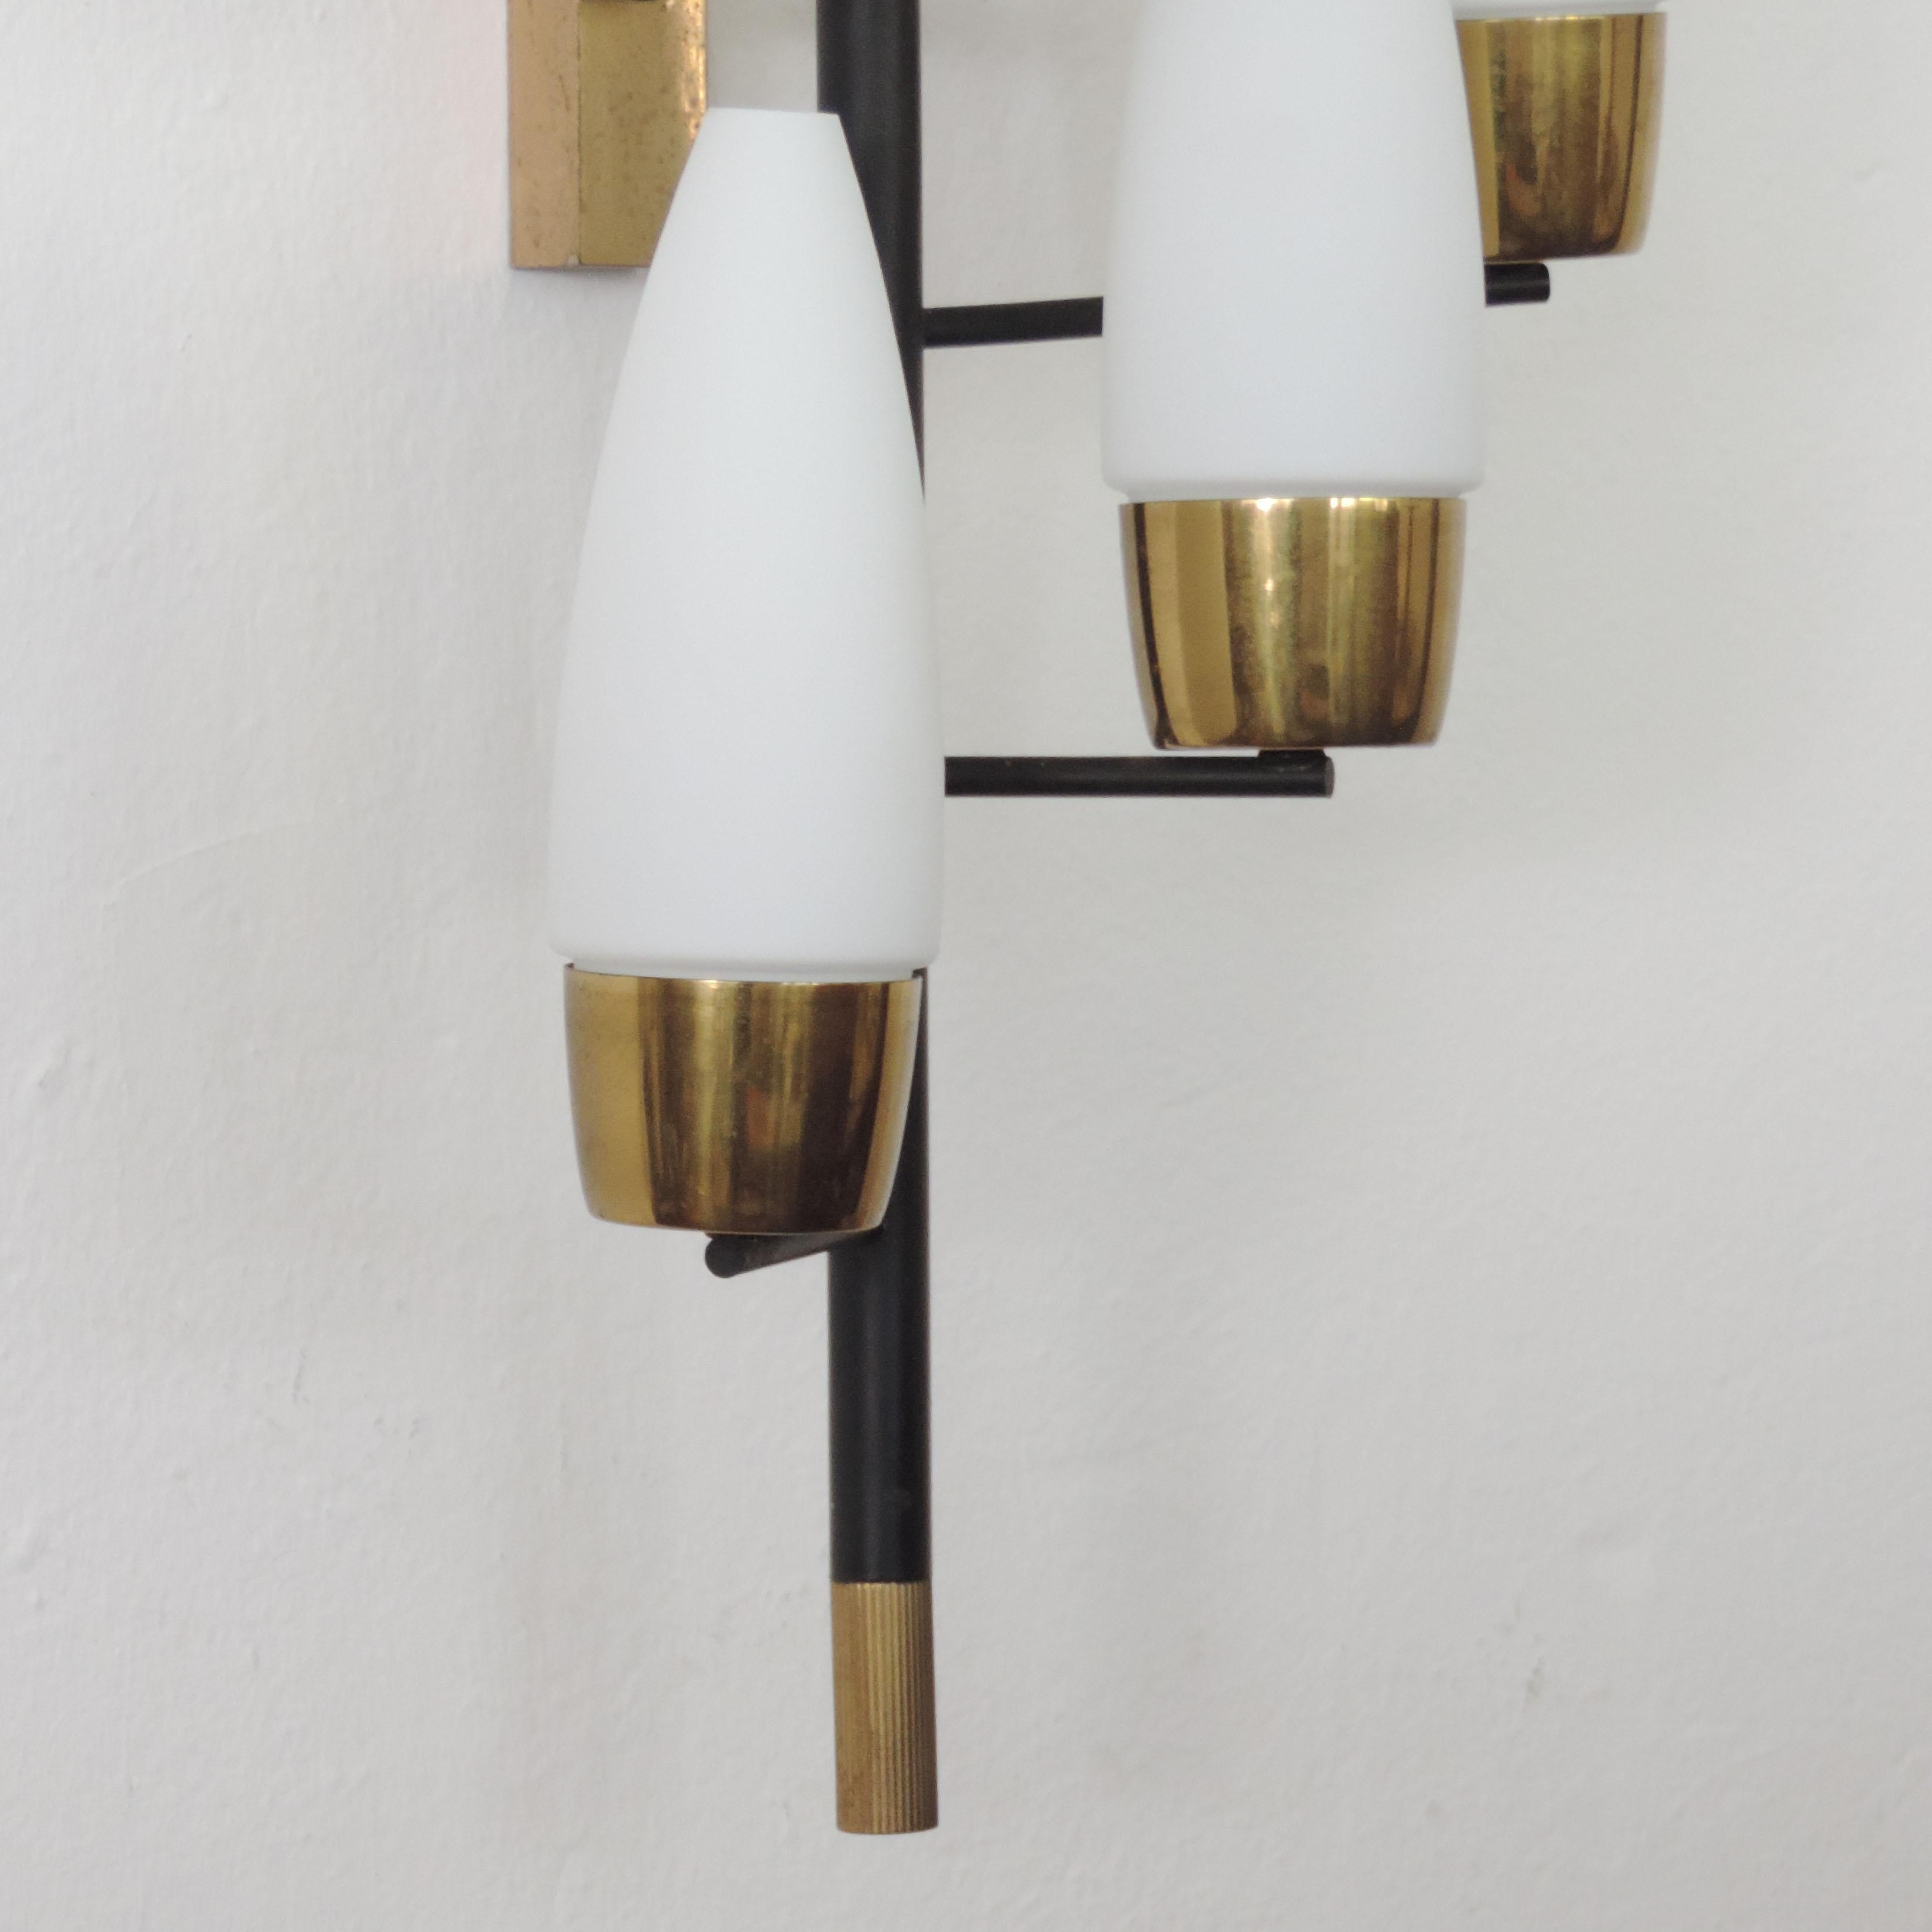 Mid-20th Century Monumental Wall Lamp Attributed to Stilnovo, Italy, 1950s For Sale